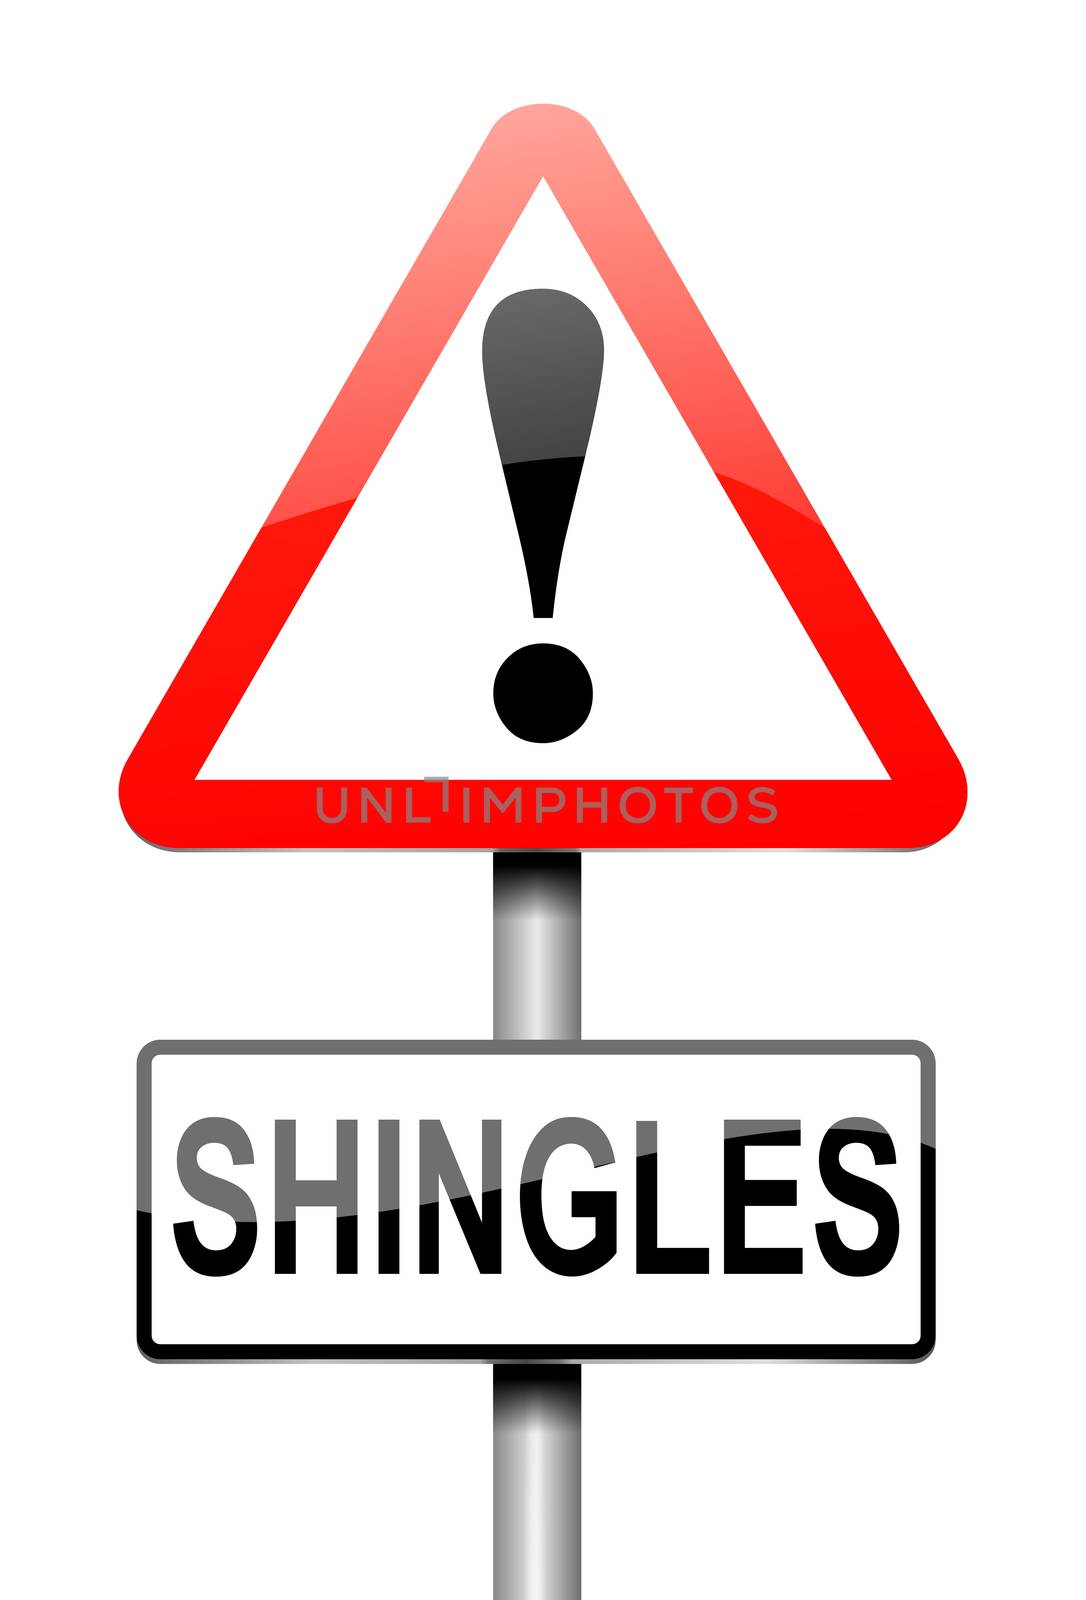 Shingles concept. by 72soul